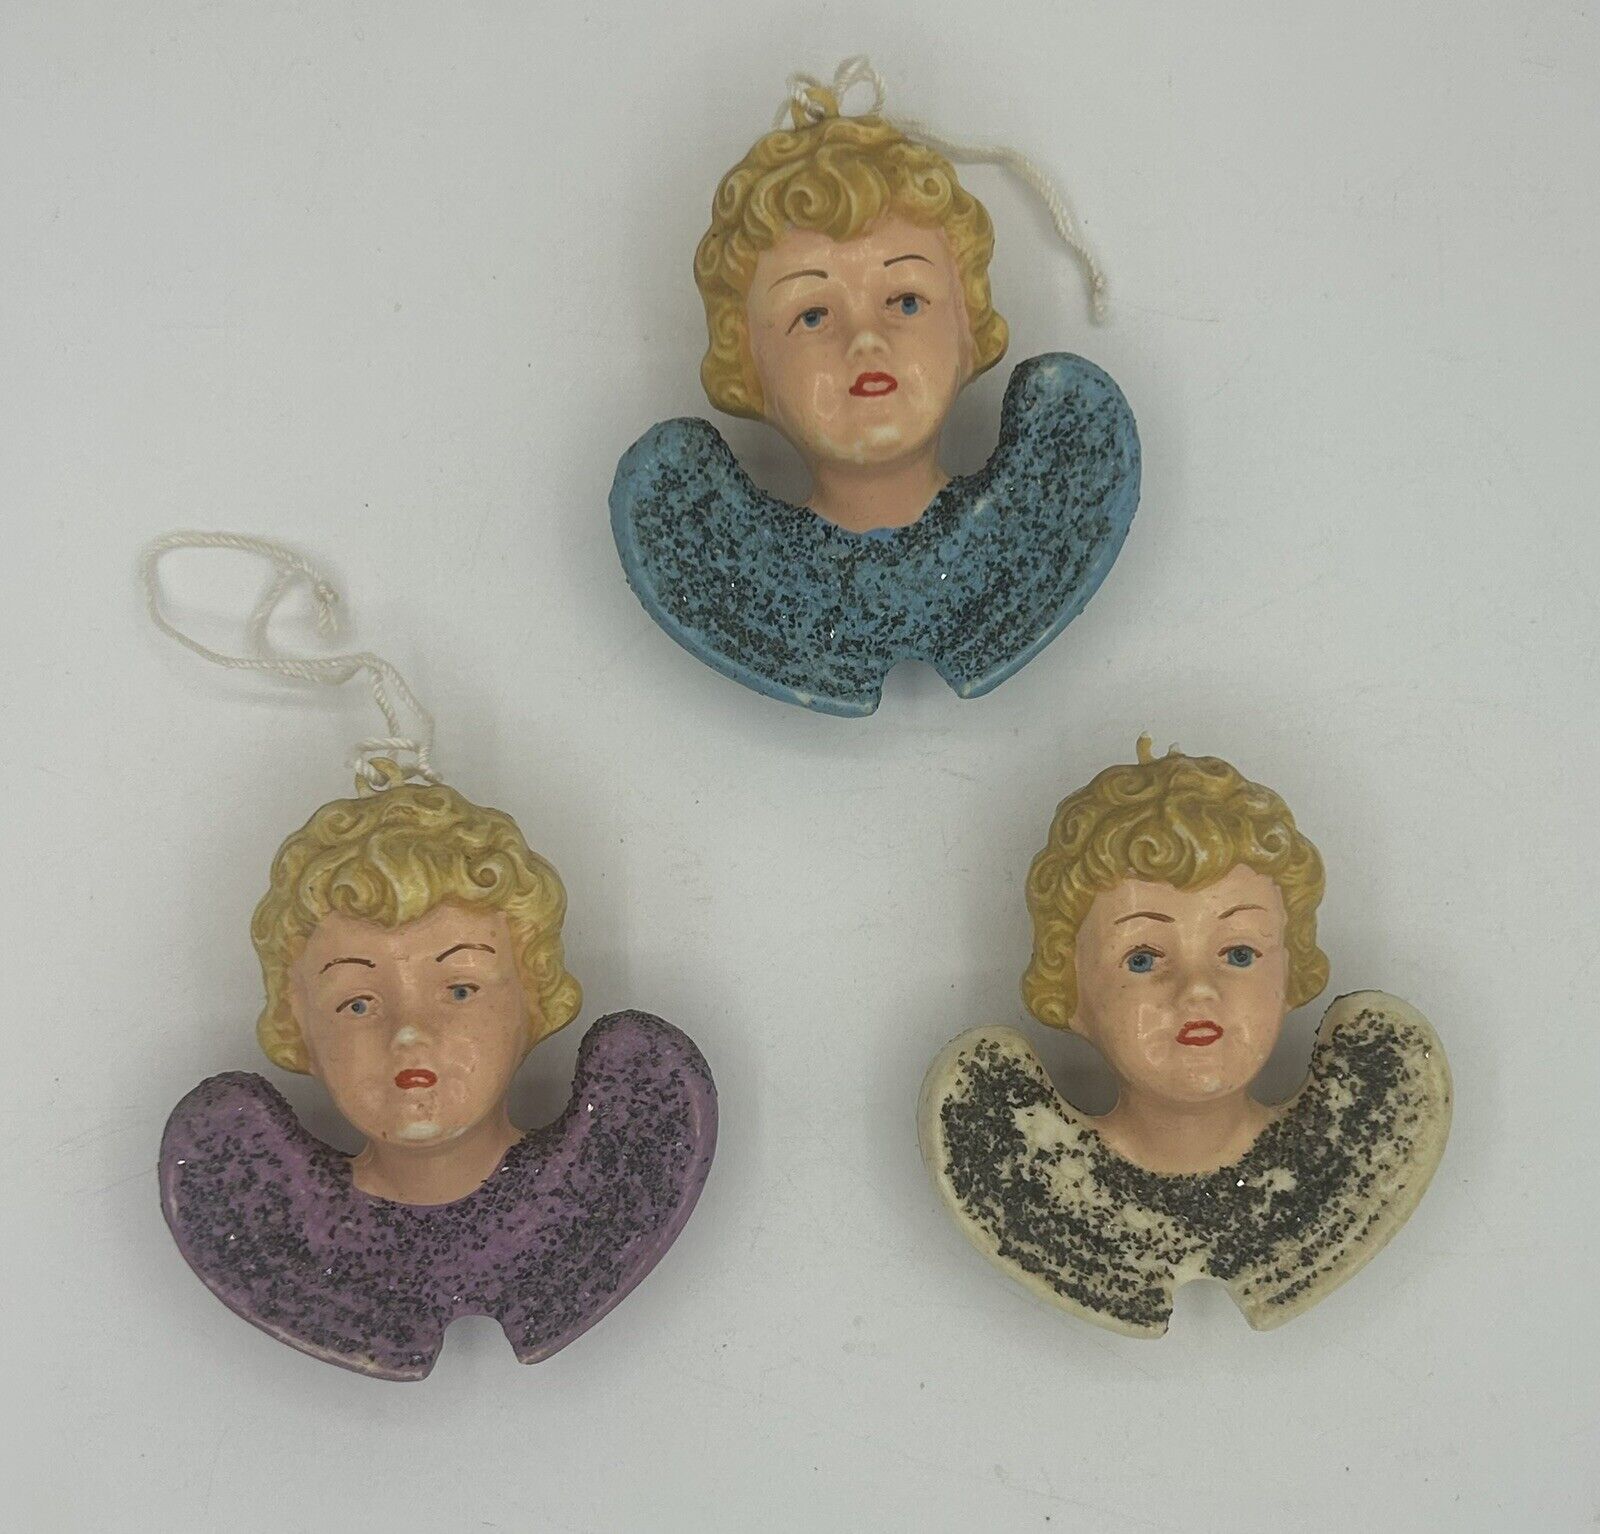 1940-1950s ANGEL ORNAMENTS - SET OF 3 - COLLECTIBLE GERMANY